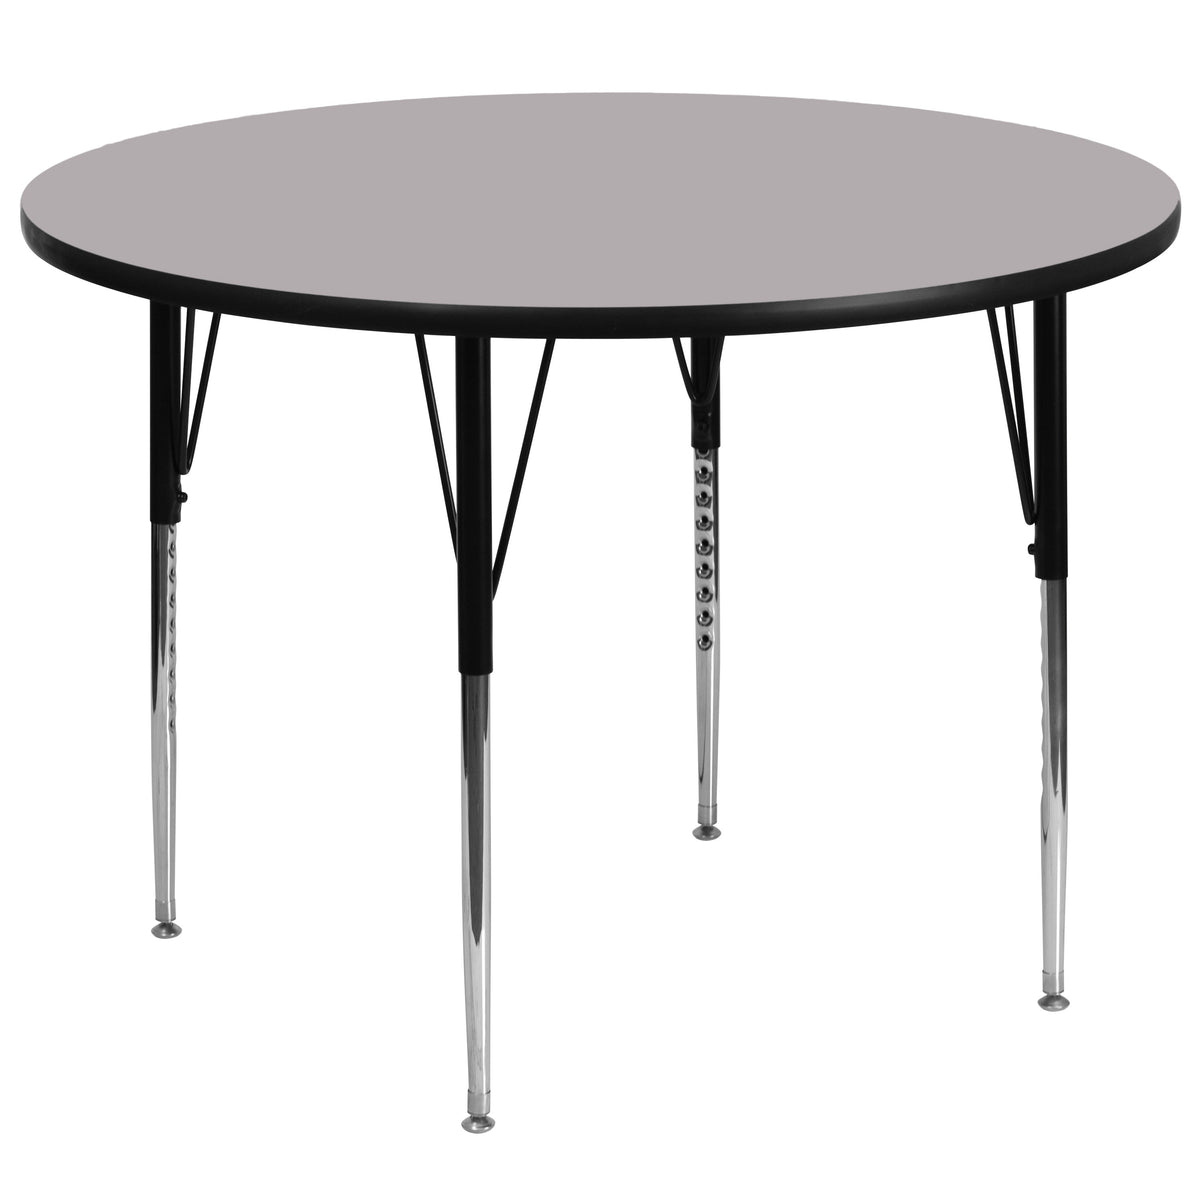 Gray |#| 60inch Round Grey Thermal Laminate Activity Table - Standard Height Adjustable Legs